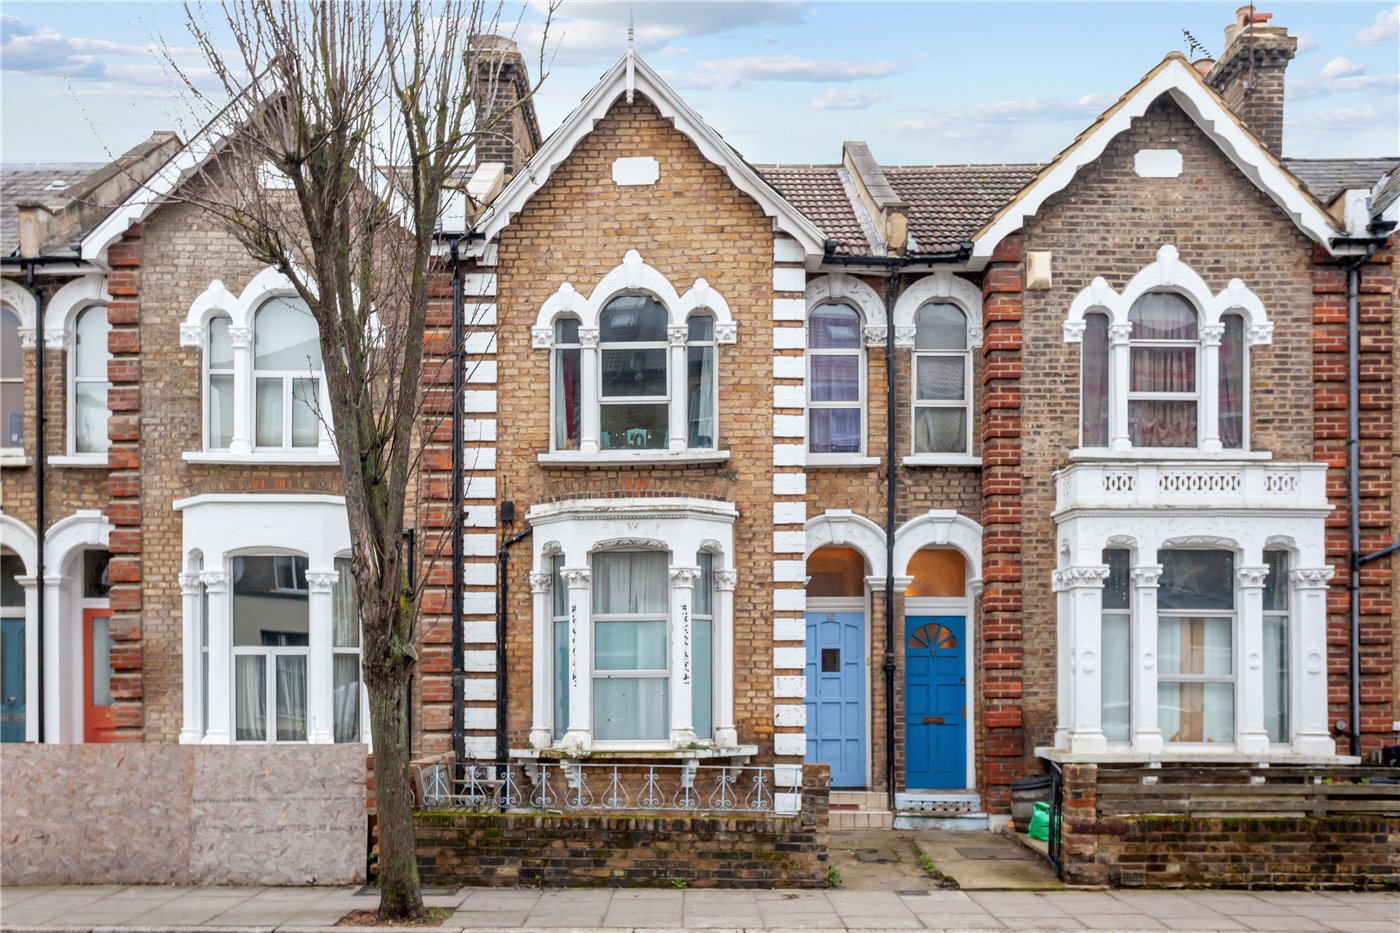 3 bedroom detached house for sale in London